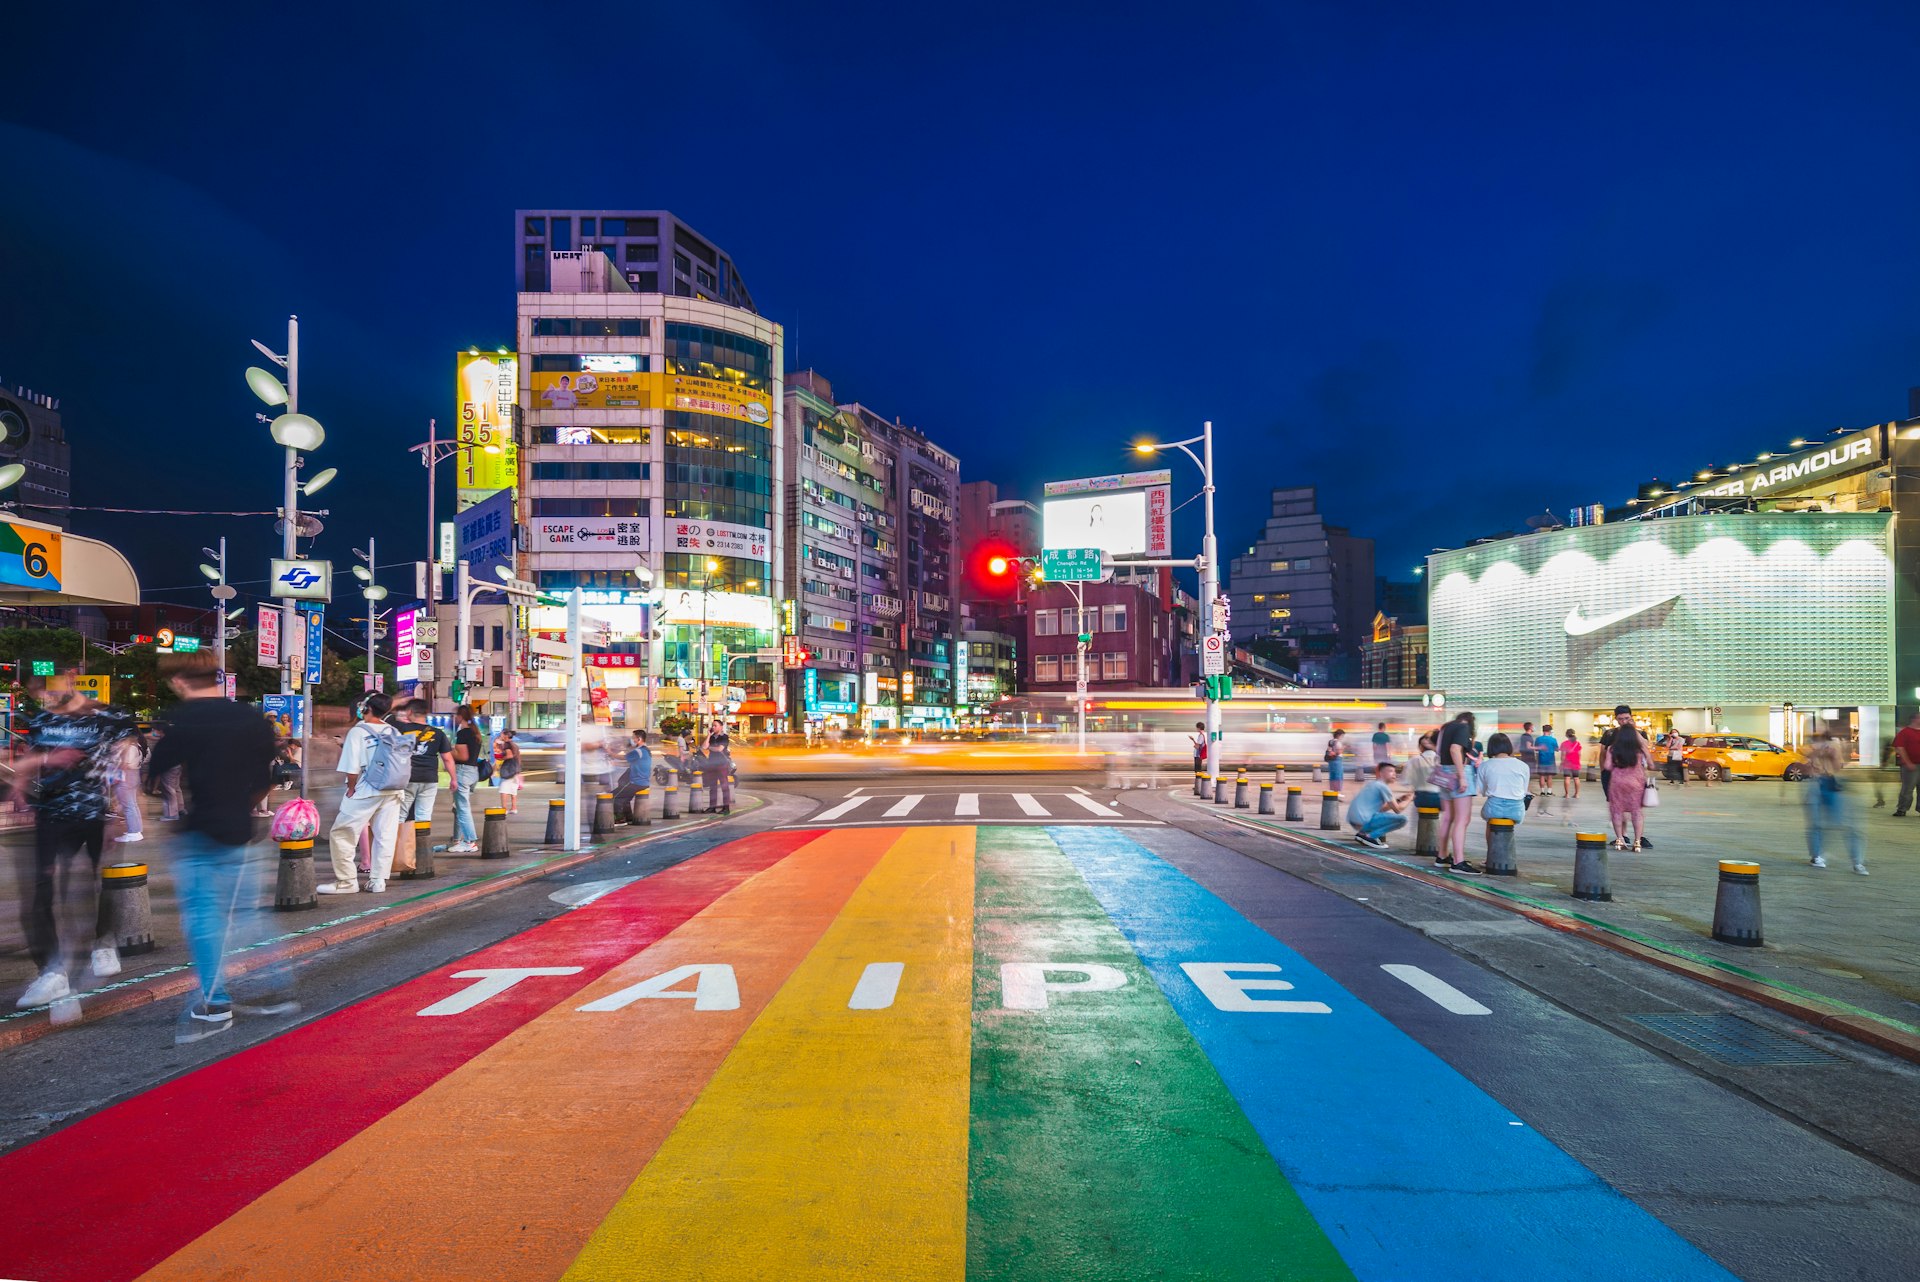 A rainbow walkway painted on the street spelling out TAIPEI